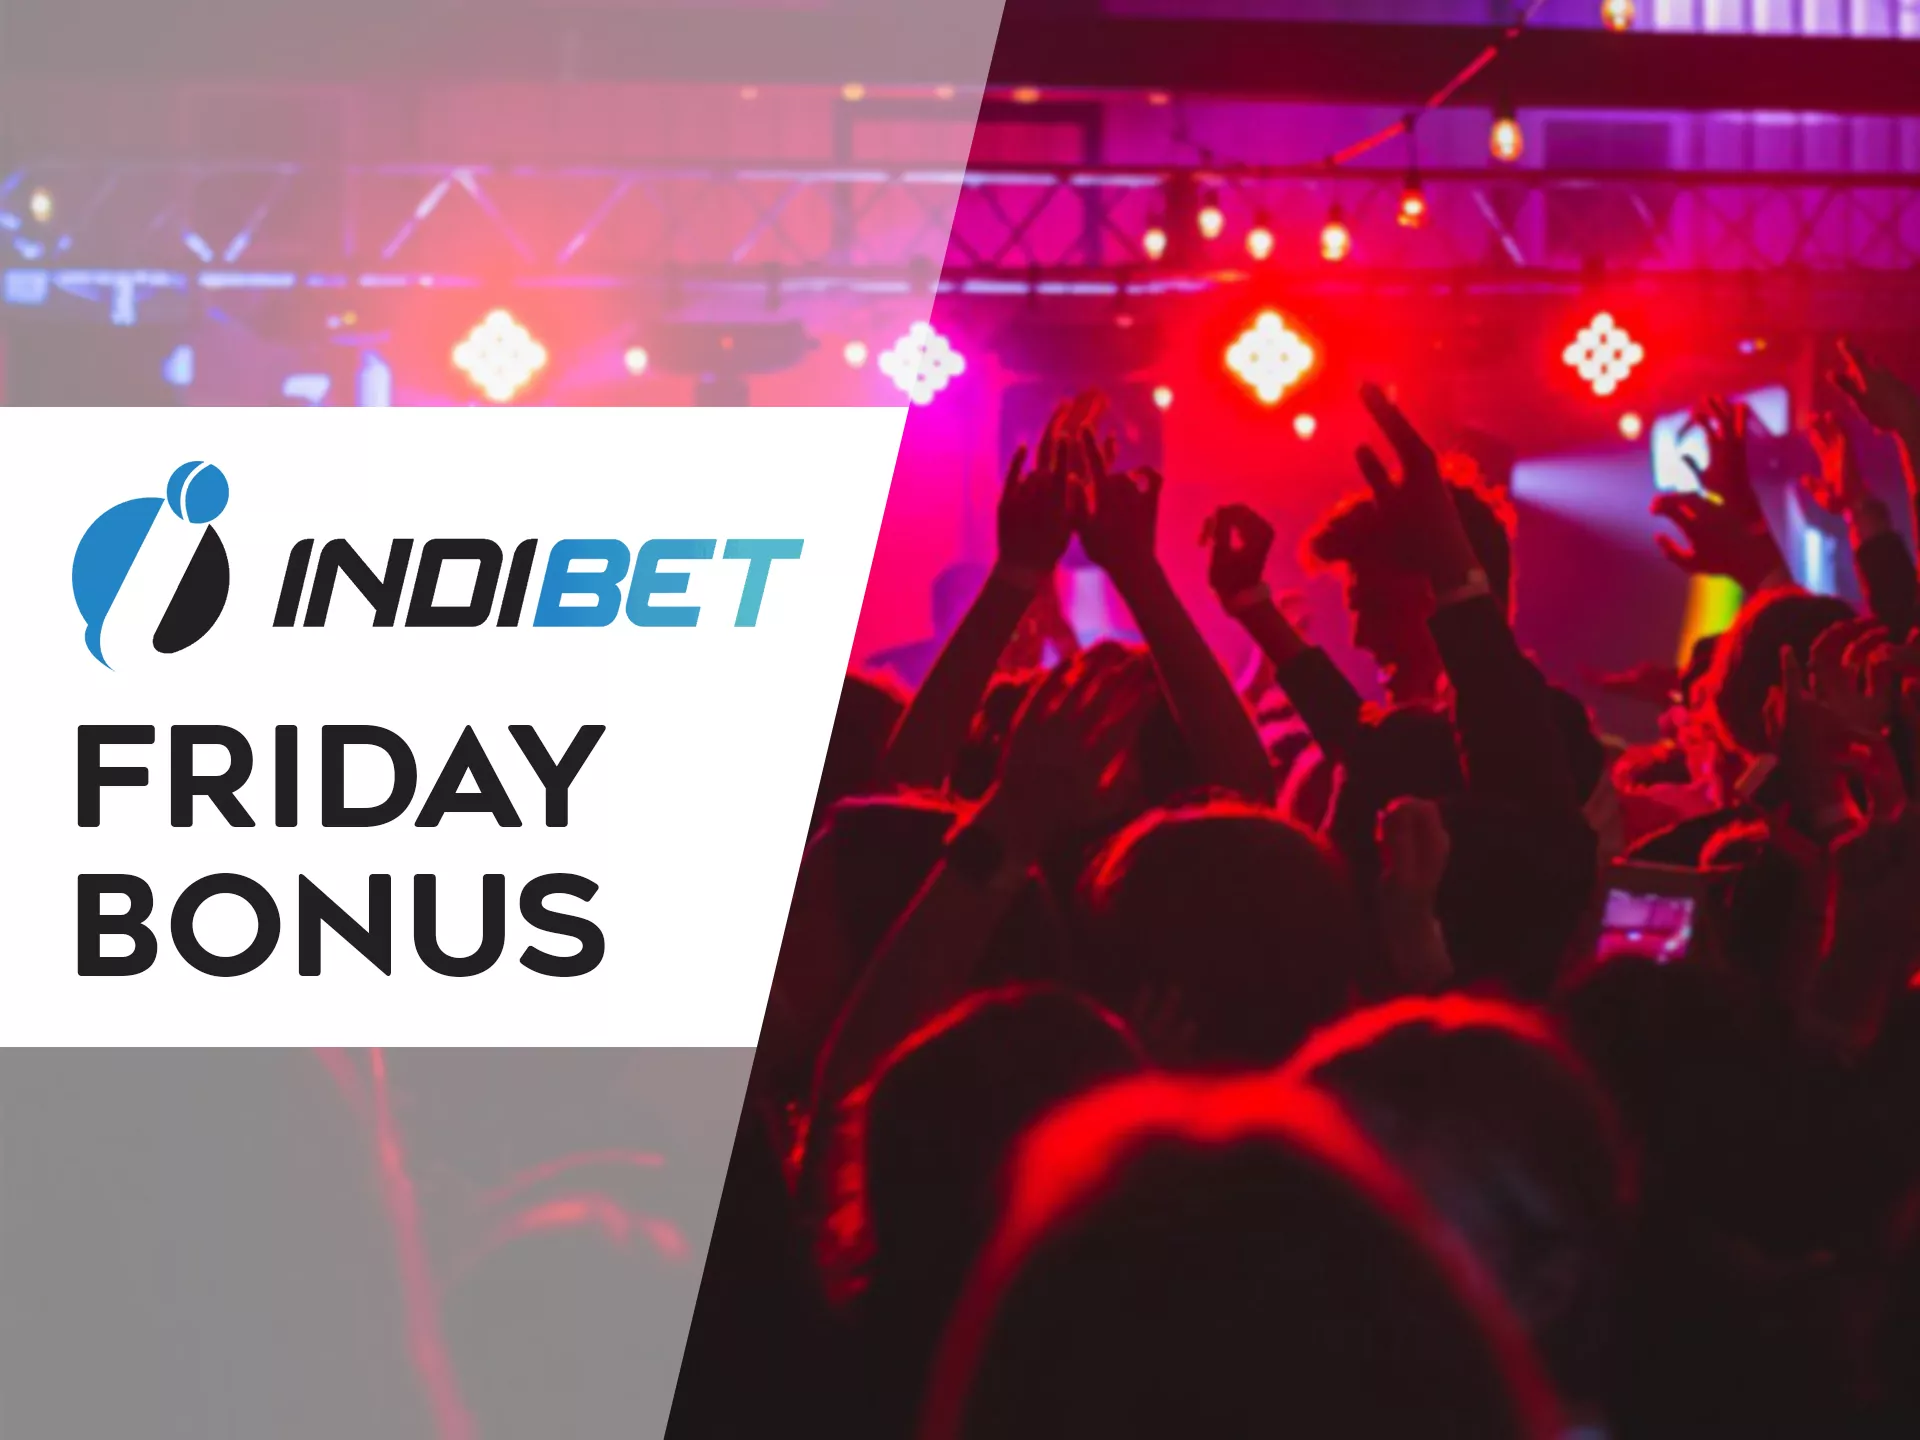 You can get additional bonus on the Friday deposit.